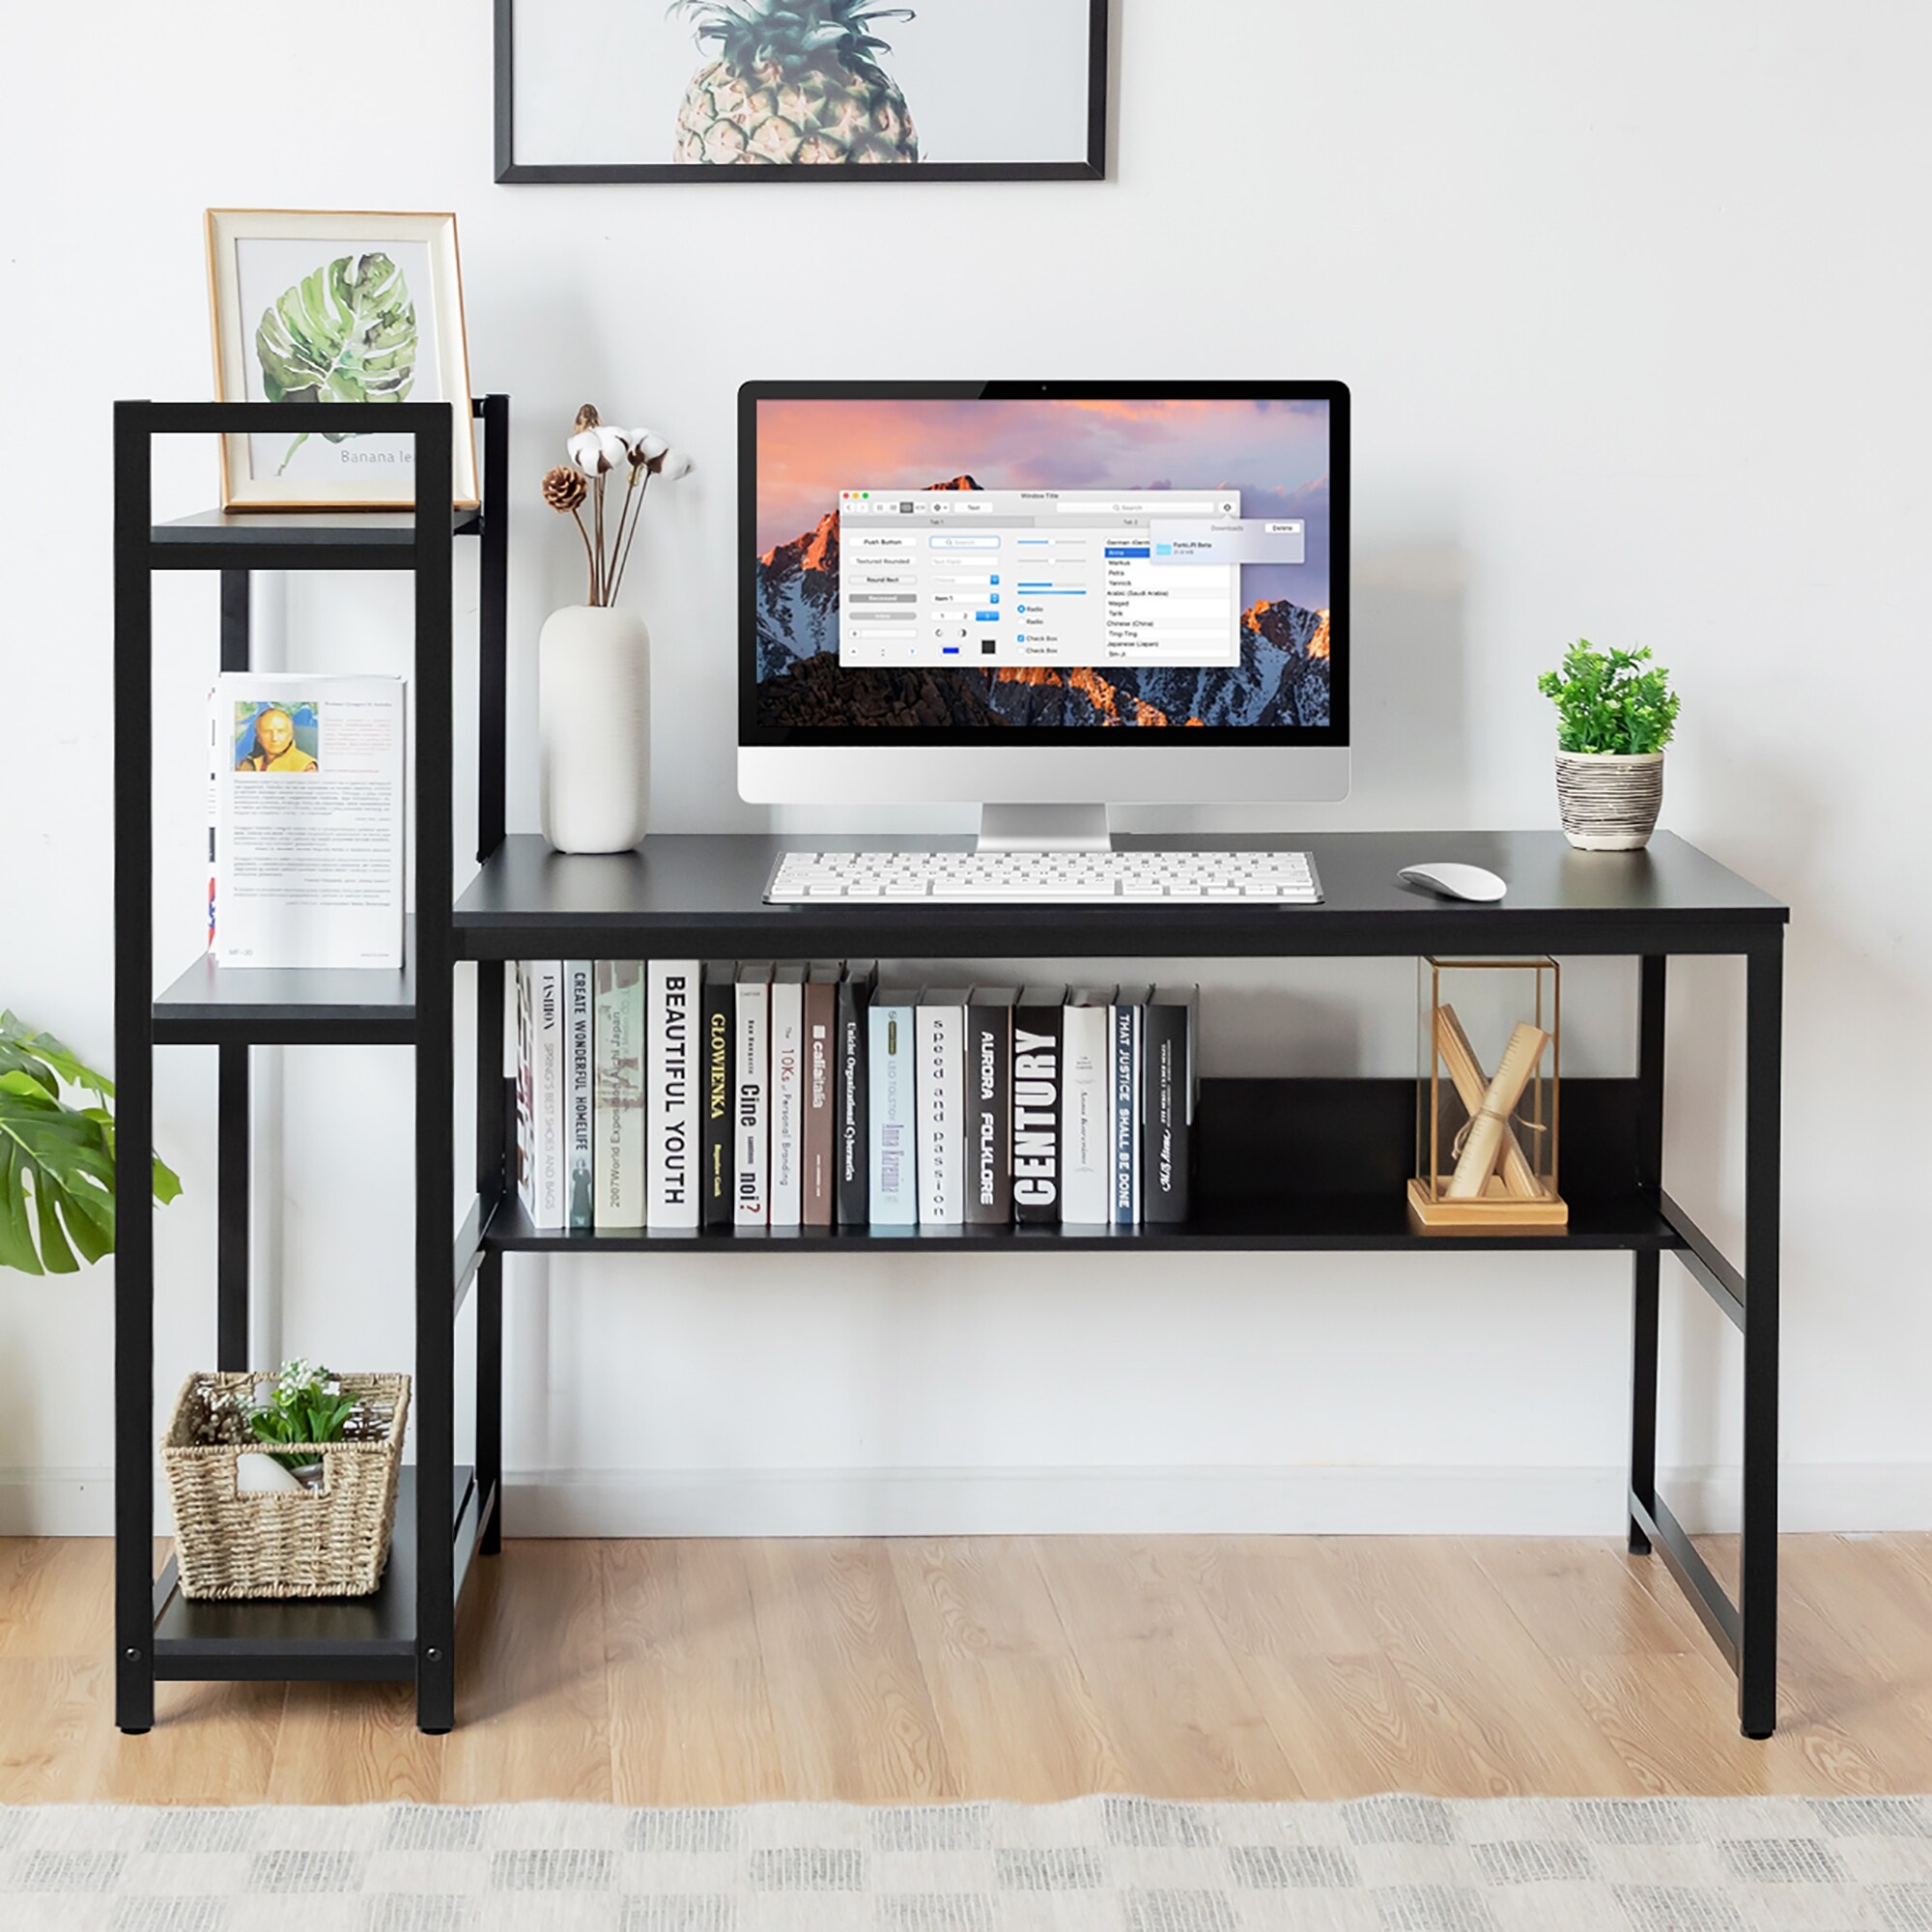 https://ak1.ostkcdn.com/images/products/is/images/direct/a66aea44e6159ad1a4a5b20b82be65c51ea2b35b/Costway-Multi-Functional-Computer-Desk-with-4-tier-Storage-shelves.jpg